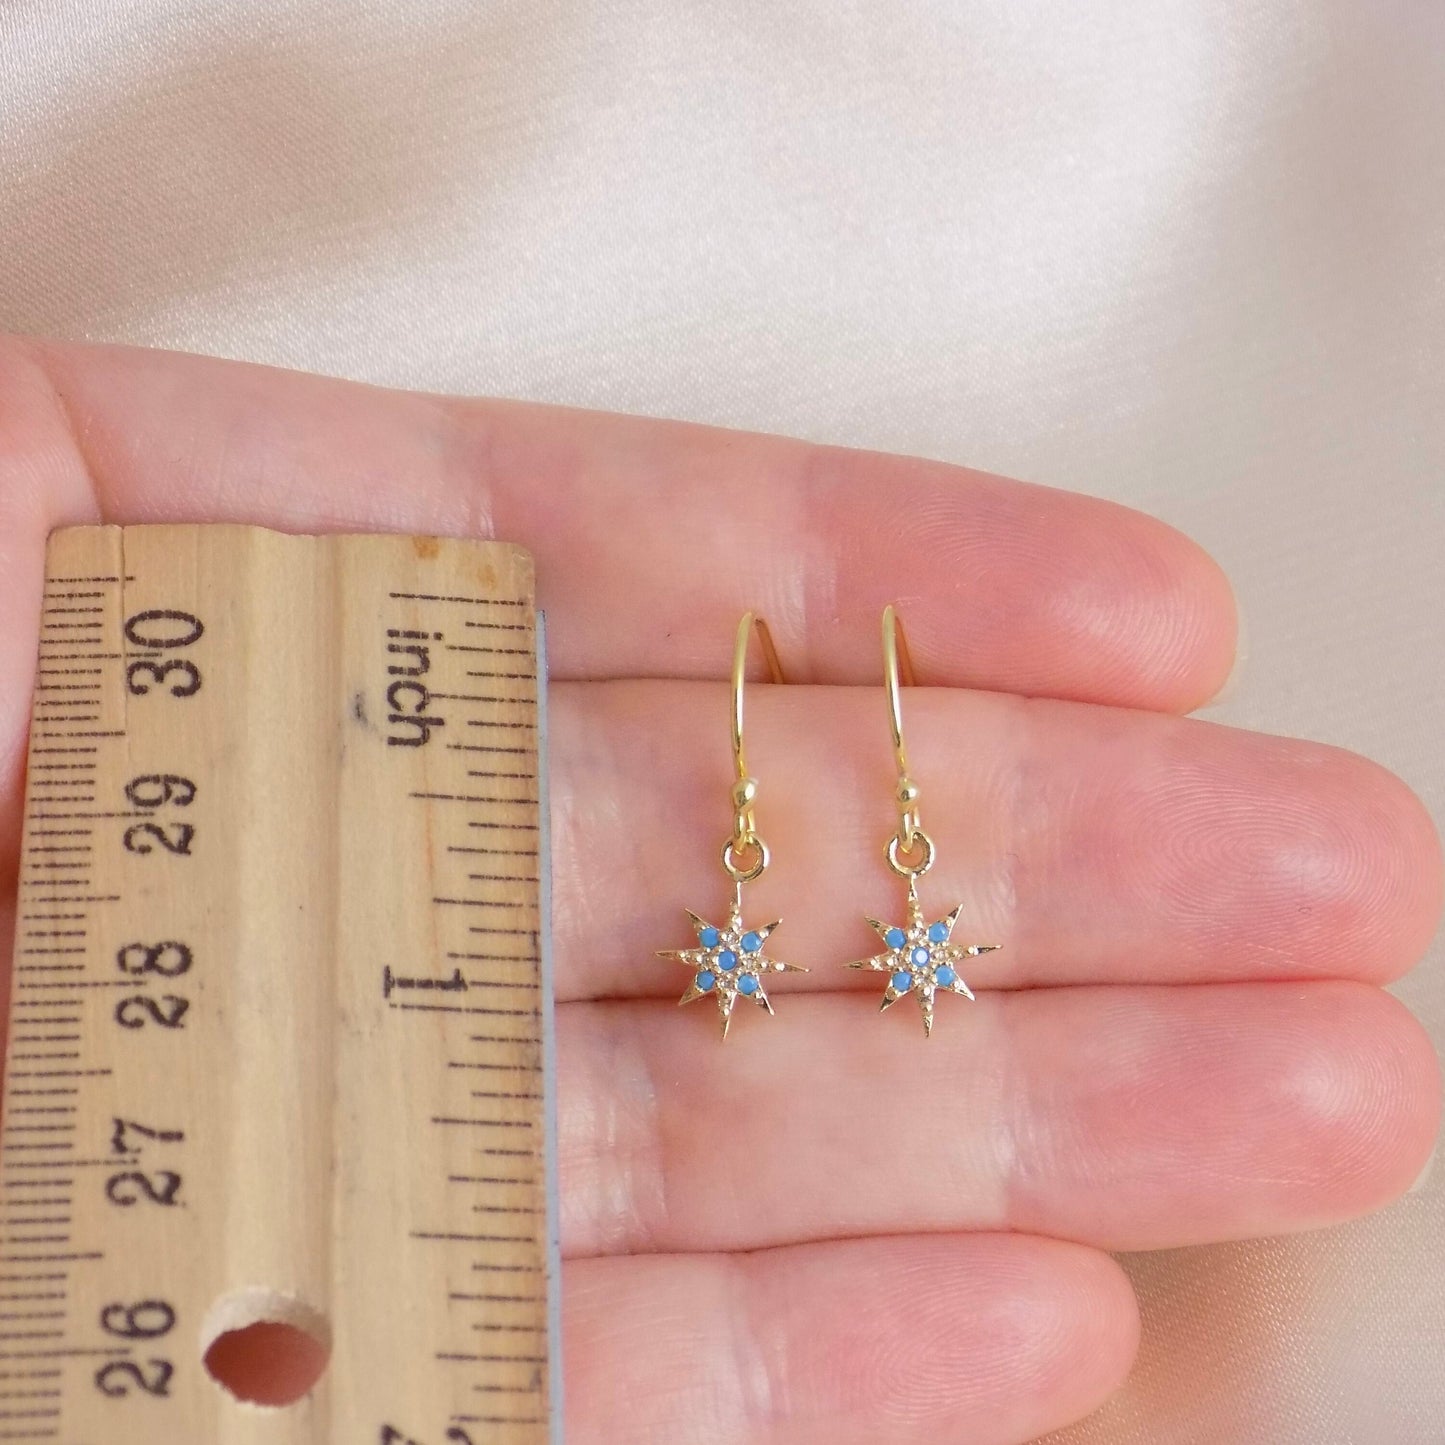 Tiny North Star Earrings Gold, Small Star Burst Drop Dangle Earring, Sparkly Turquoise Cubic Zirconia Stones, Gift For A Friend, M6-67